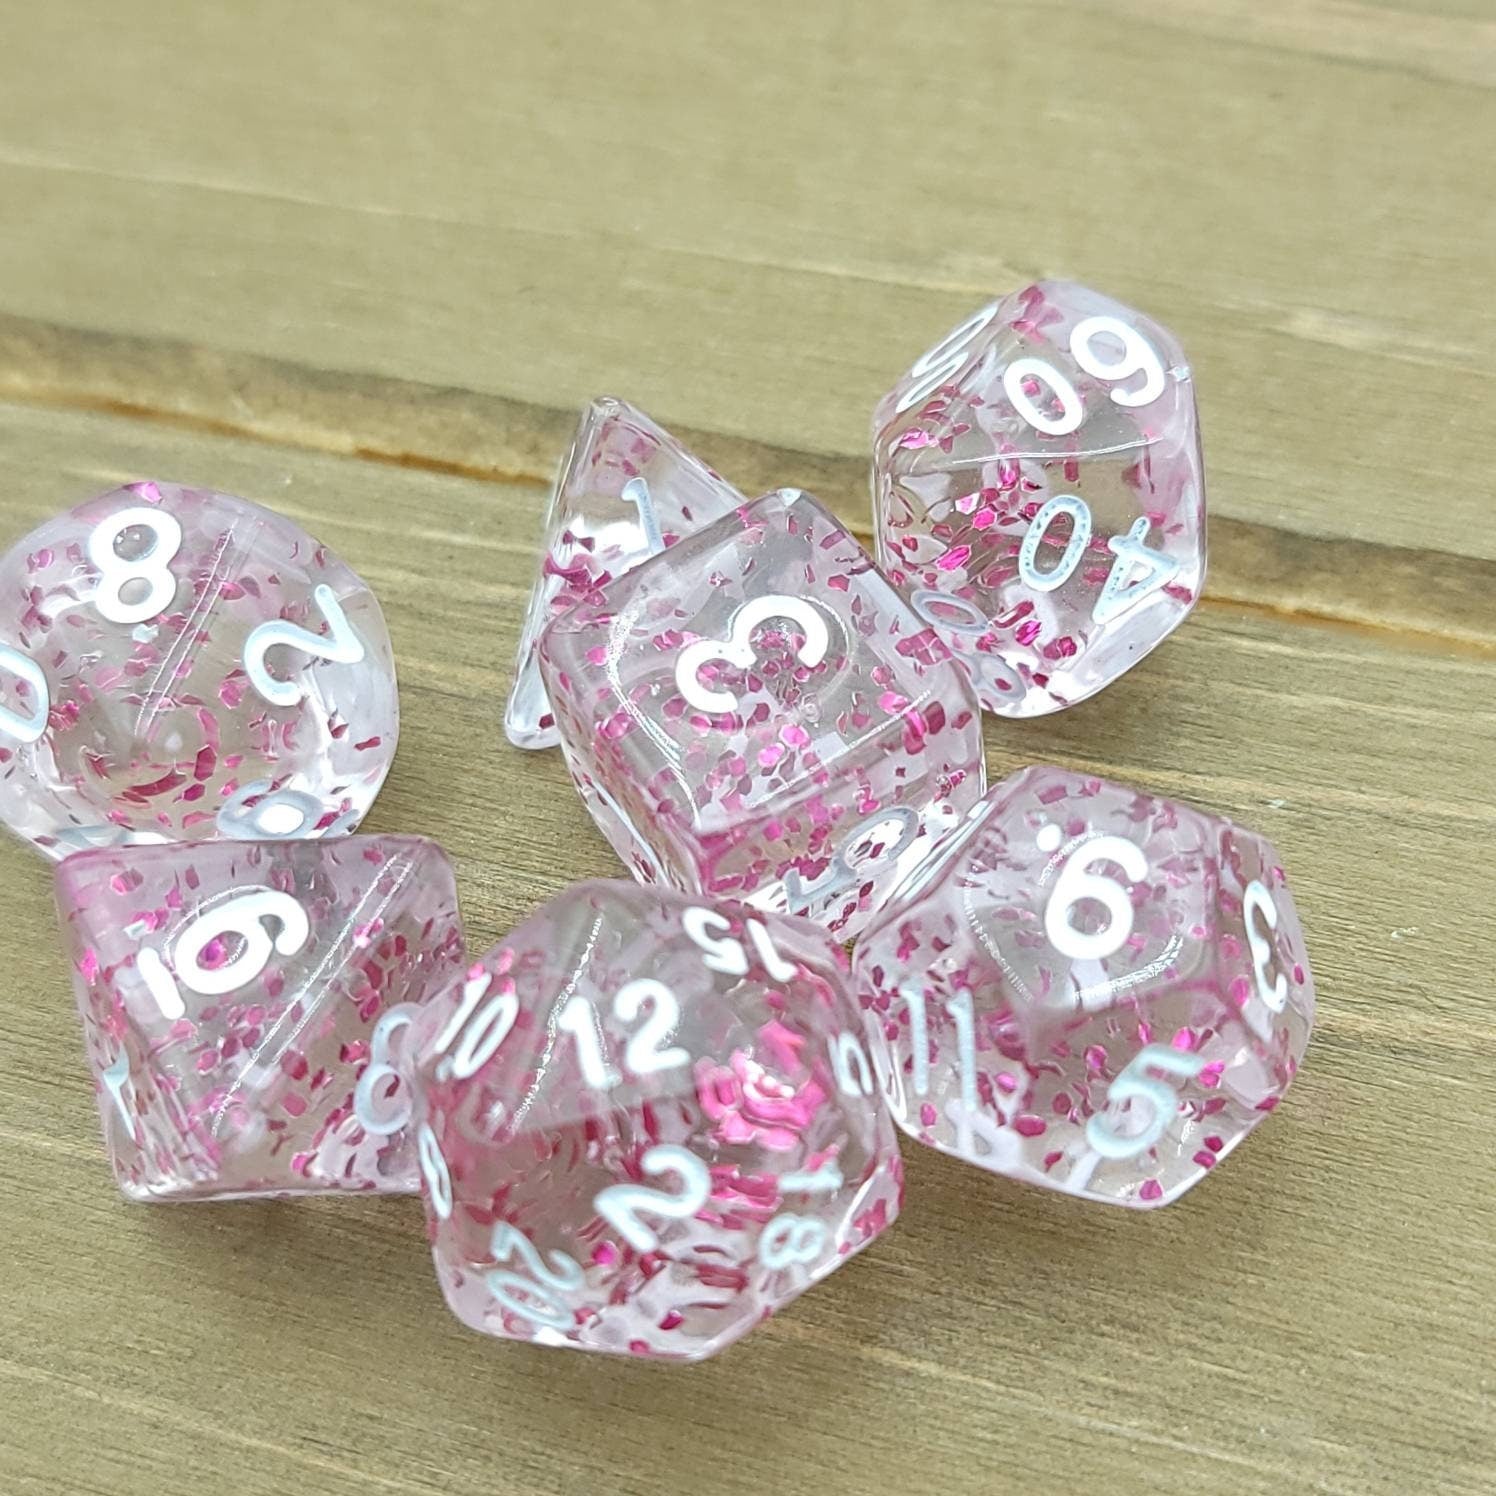 Magenta Confetti | RPG Dice Set| RPG Dice | Polyhedral Dice Set | Dungeons and Dragons | DnD Dice Set | Gaming Dice Set